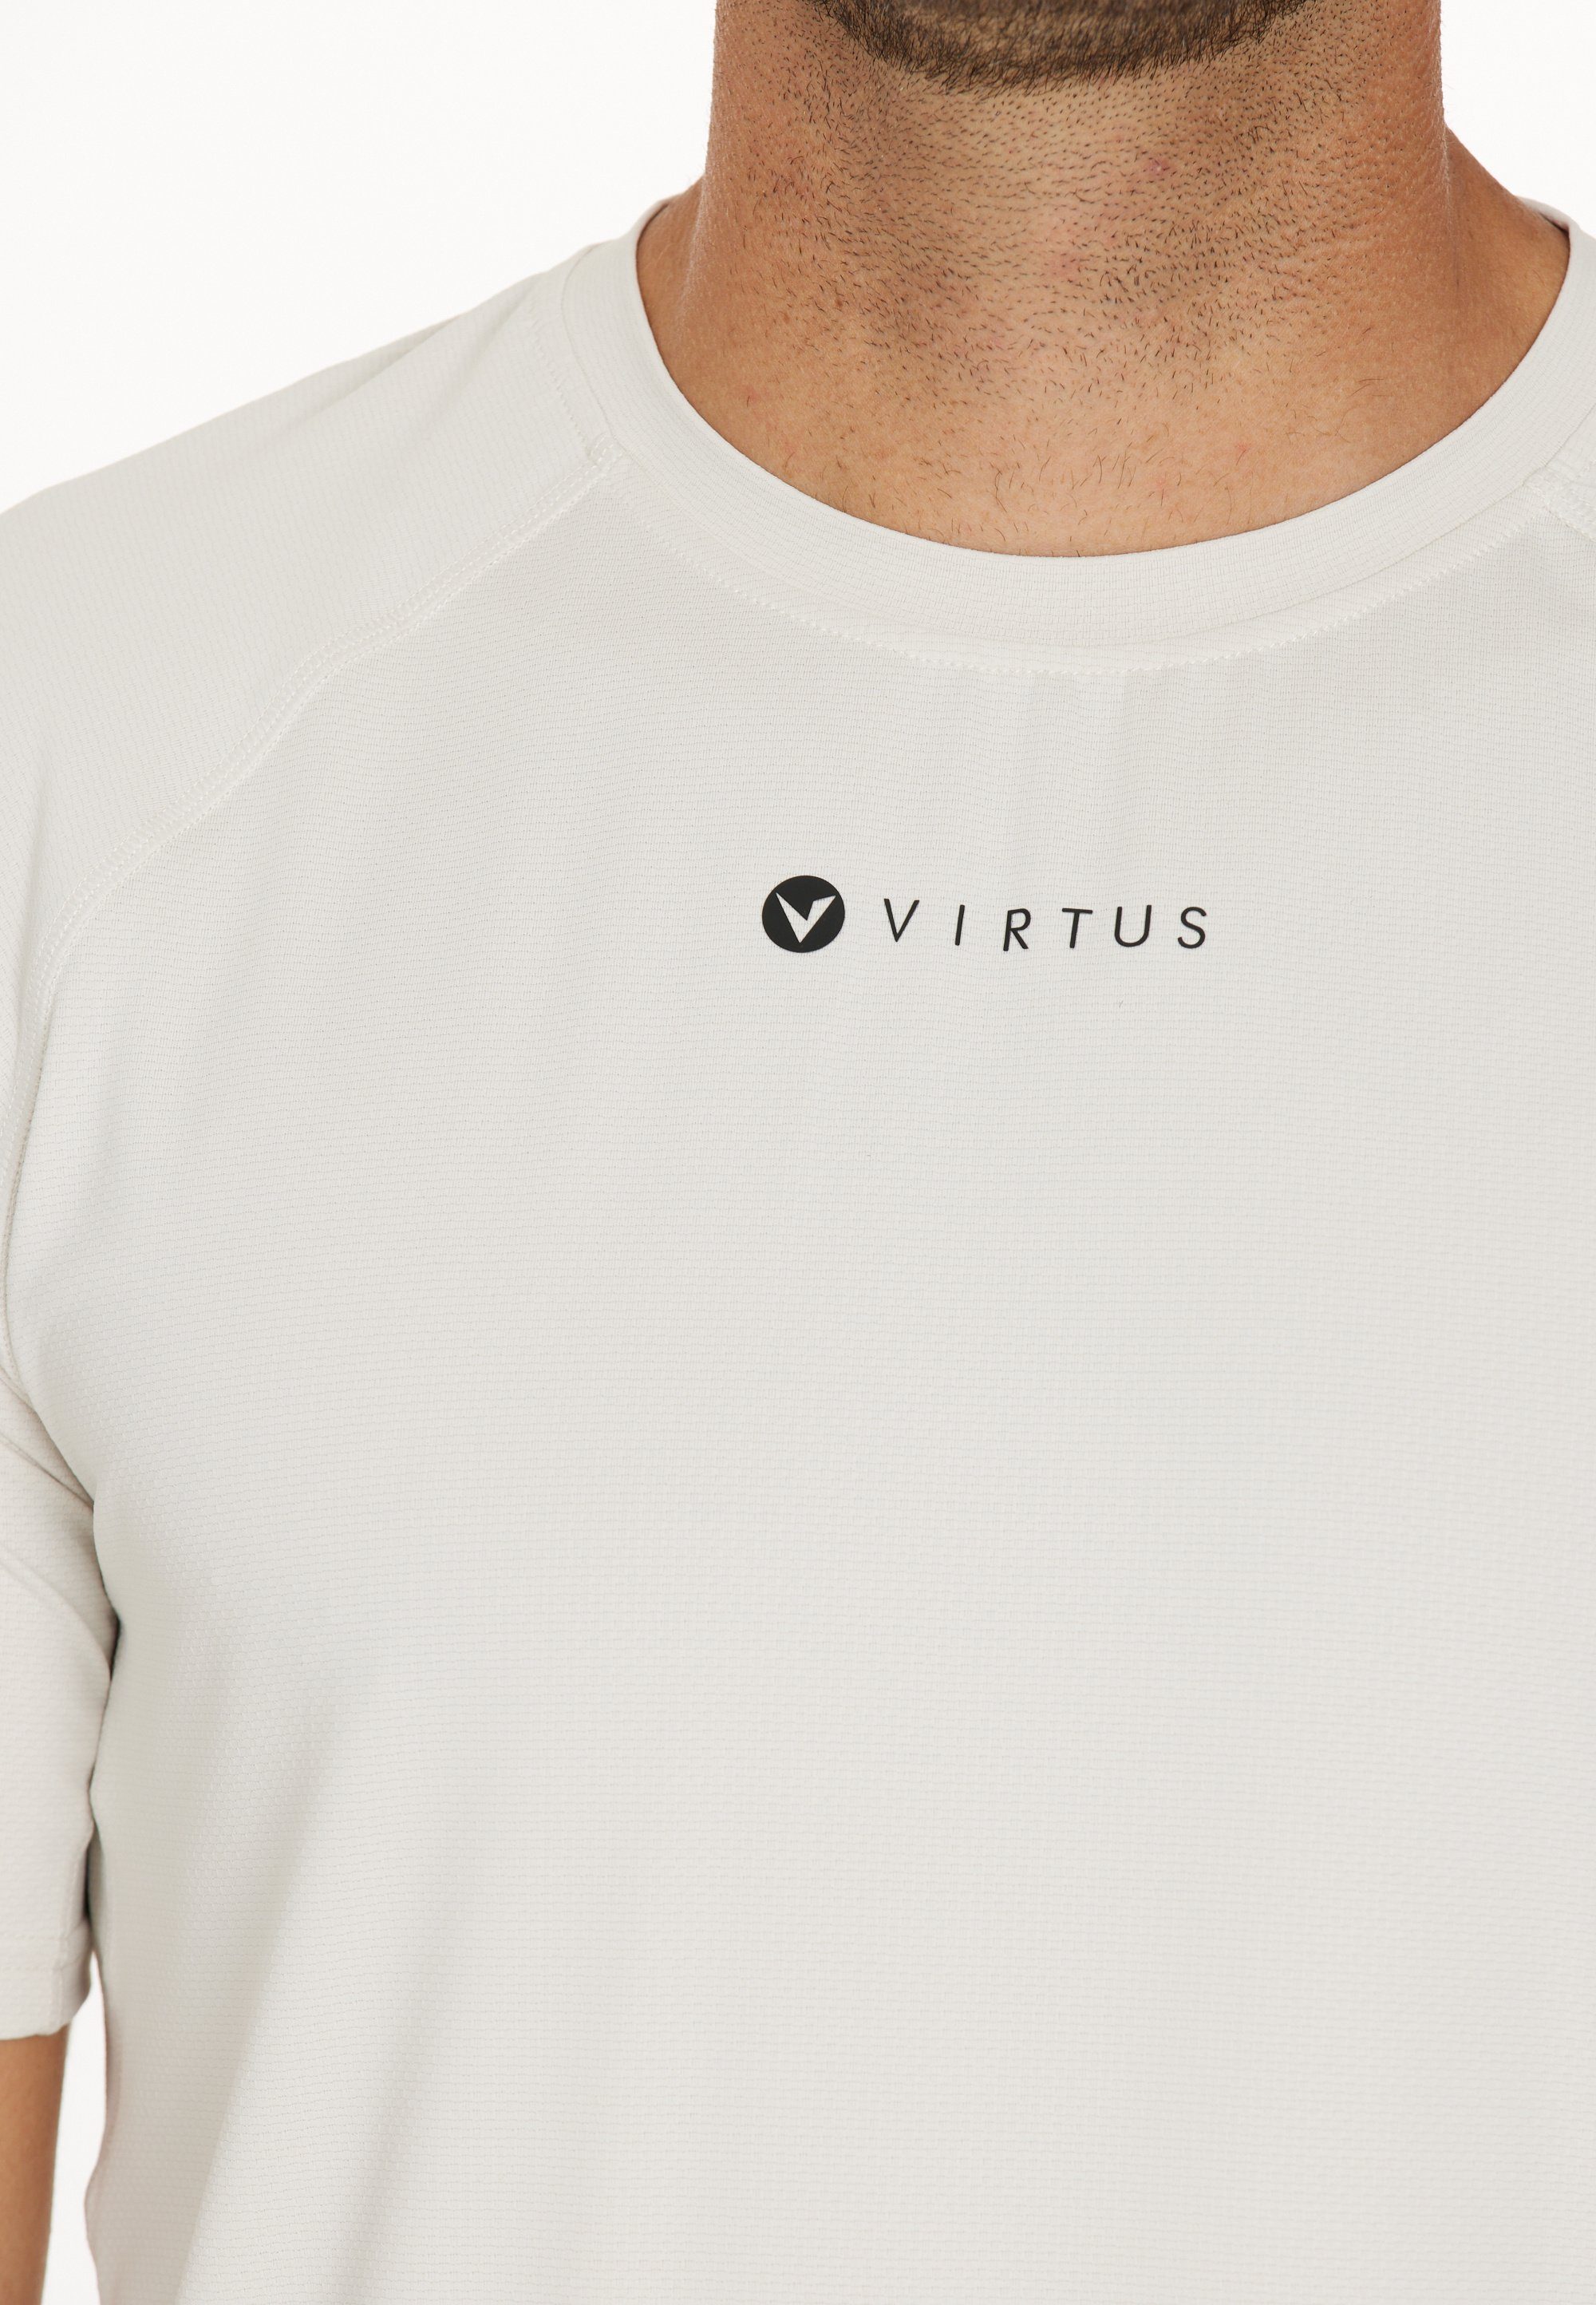 Toscan Virtus (1-tlg) mit Silver+-Technologie Muskelshirt offwhite